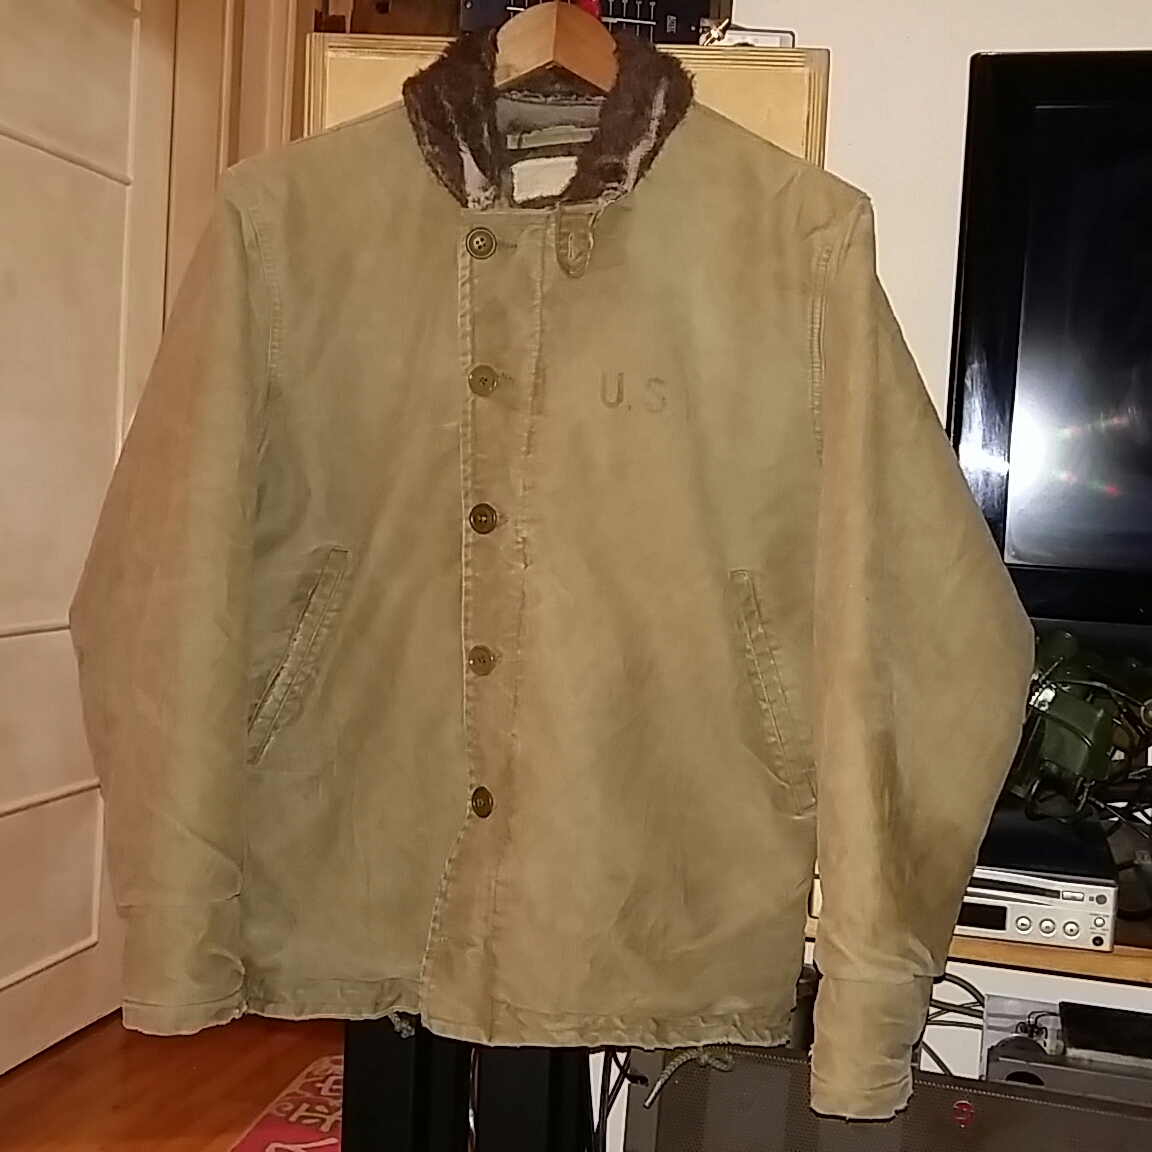 My repro WWII blue N1 deck jacket | Vintage Leather Jackets Forum